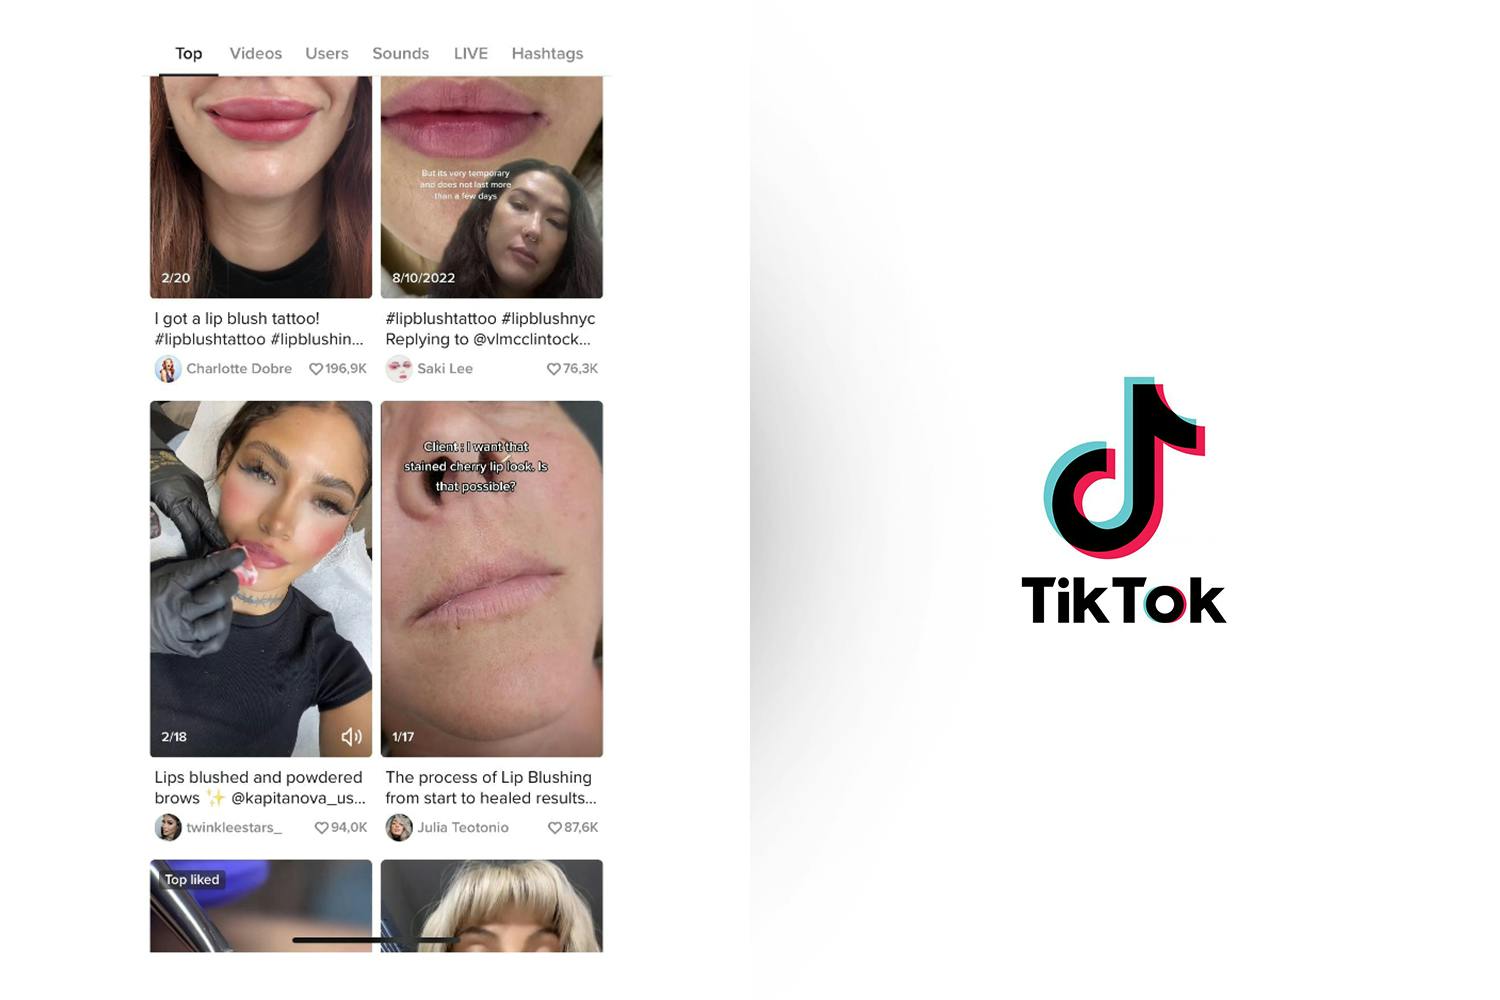 TikTok is flooded with videos from satisfied lip contours!